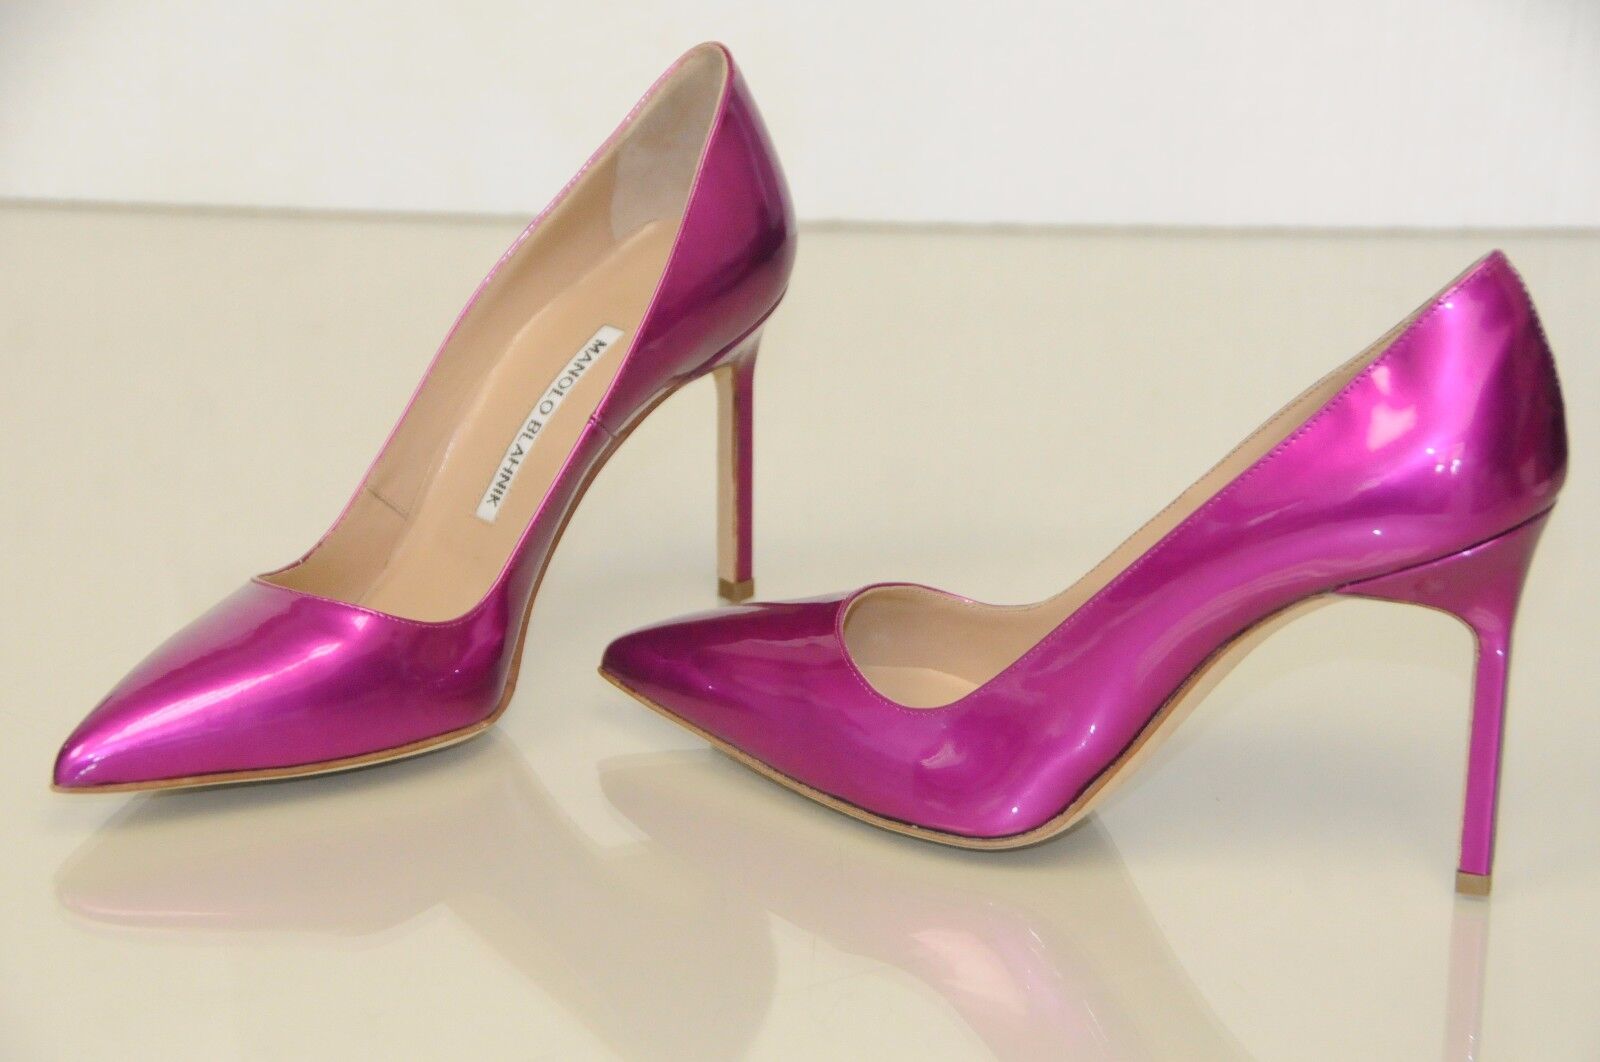 Pre-owned Manolo Blahnik Bb 105 Pink Pearly Patent Shoes Pumps 36 36.5 38.5 39.5 40